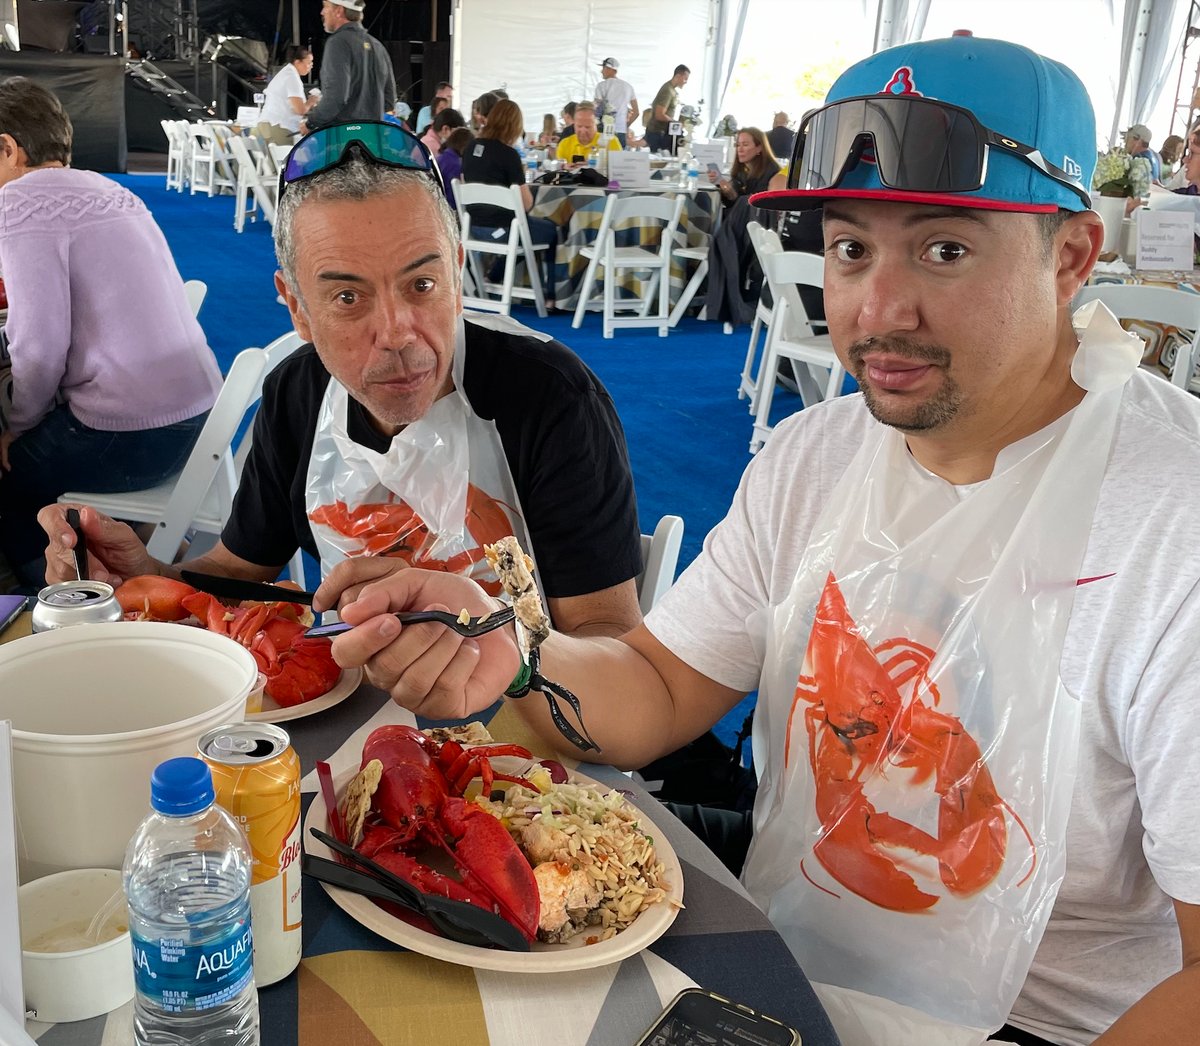 CHRIS PAVON AND ANDRE QUIRINO EATING LOBSTER AT THE CLAMBAKE FOR THE BEST BUDDIES CHALLENGE HYANNIS PORT